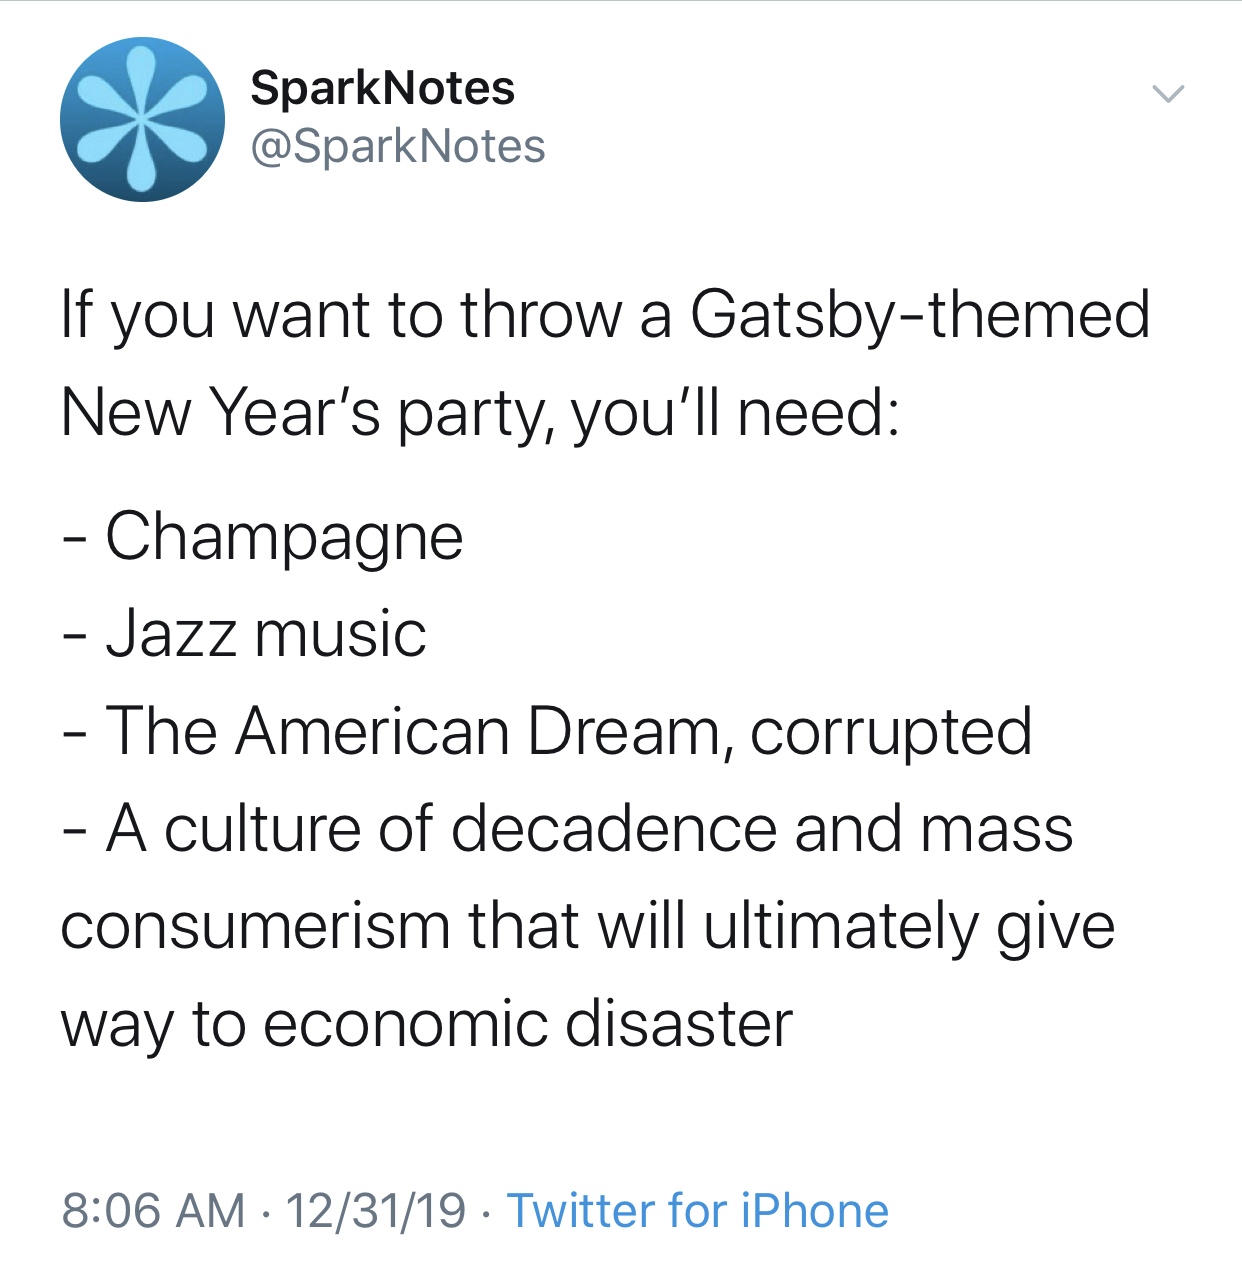 angle - SparkNote SparkNotes Notes If you want to throw a Gatsbythemed New Year's party, you'll need Champagne Jazz music The American Dream, corrupted A culture of decadence and mass consumerism that will ultimately give way to economic disaster 123119 T